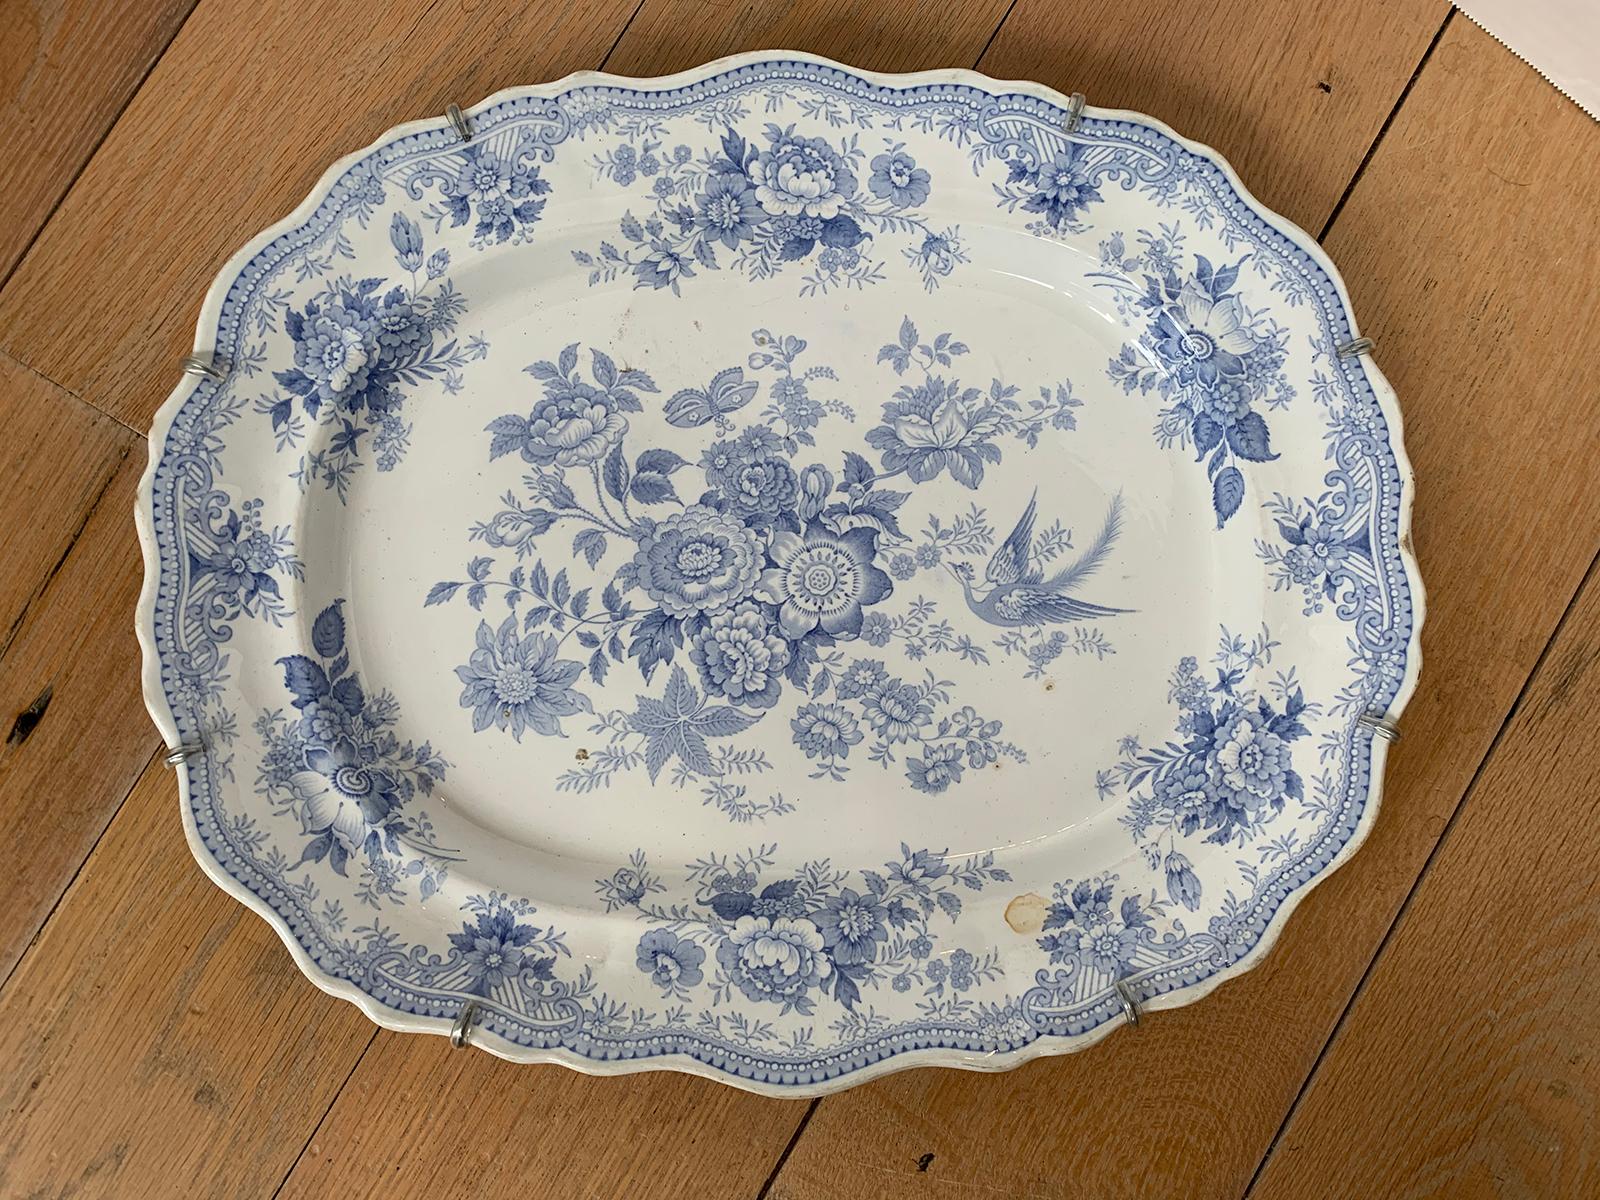 Late 19th-early 20th century English blue and white transferware porcelain oval charger in Asiatic Pheasants pattern.